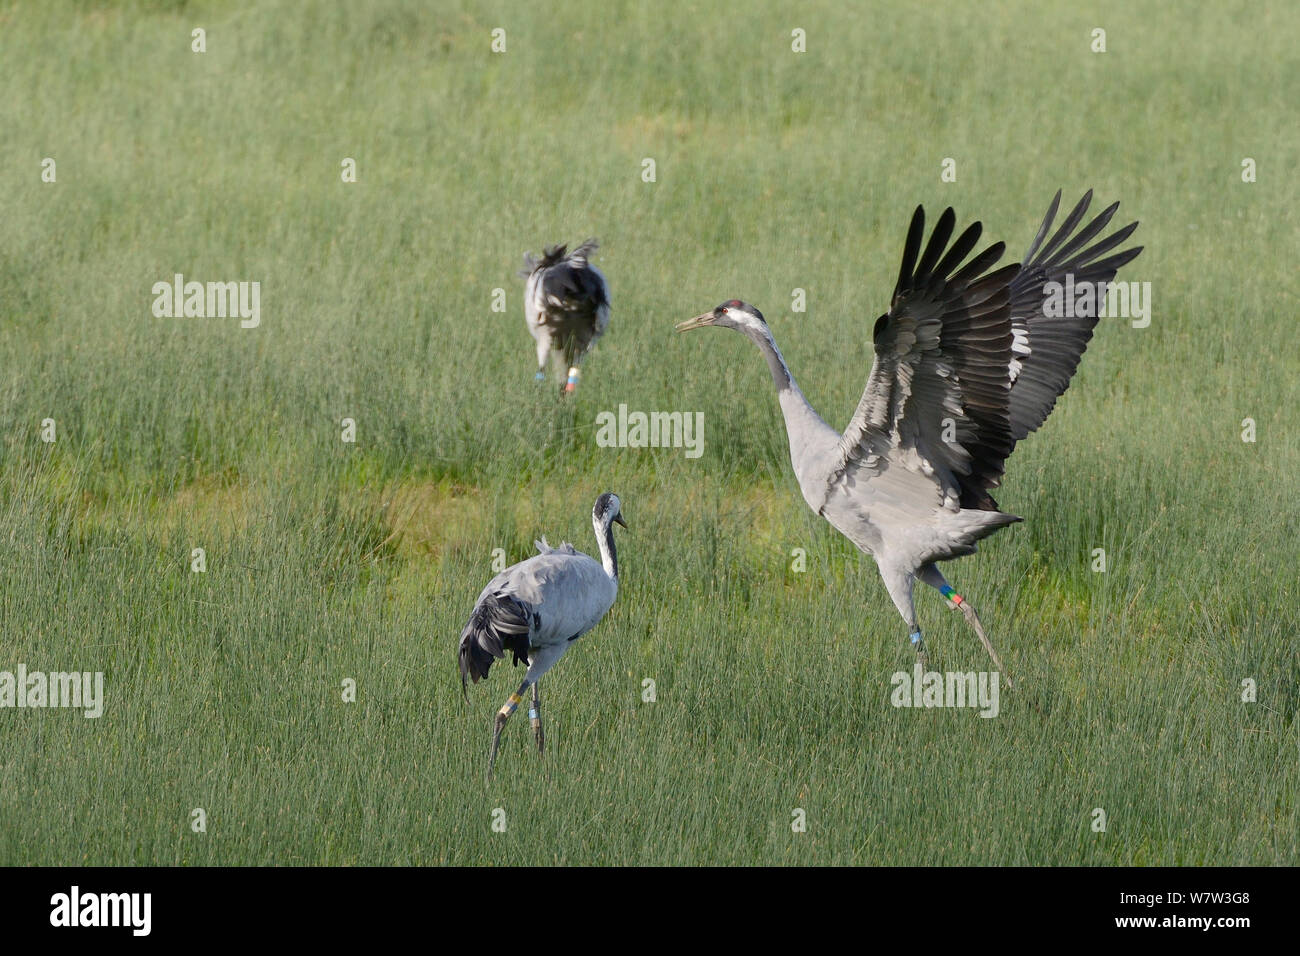 Mennis, a Common / Eurasian crane (Grus grus) released by the Great Crane Project onto the Somerset Levels, dancing near two other released birds, Elle and Wendy, on marshland,  Gloucestershire, UK, October 2013. Stock Photo